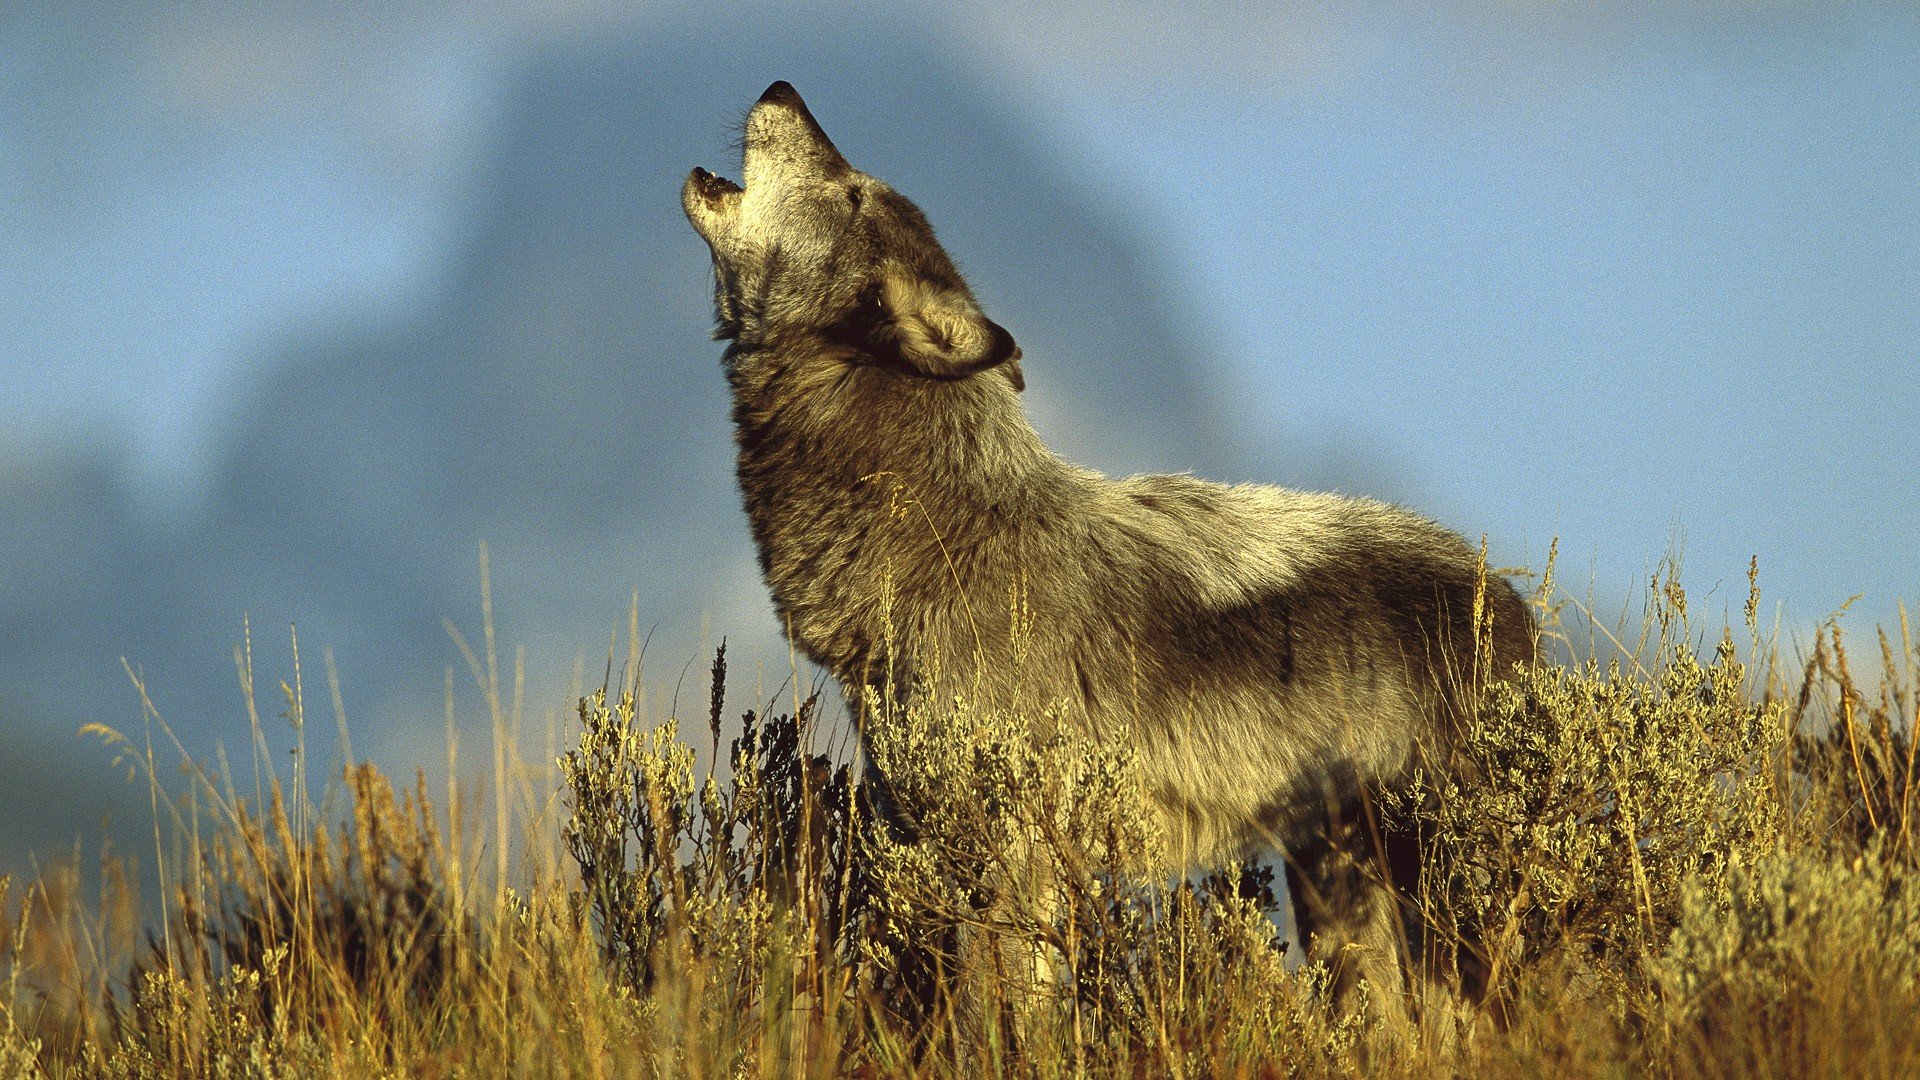 Download full hd 1920x1080 Wolf PC background ID:118322 for free